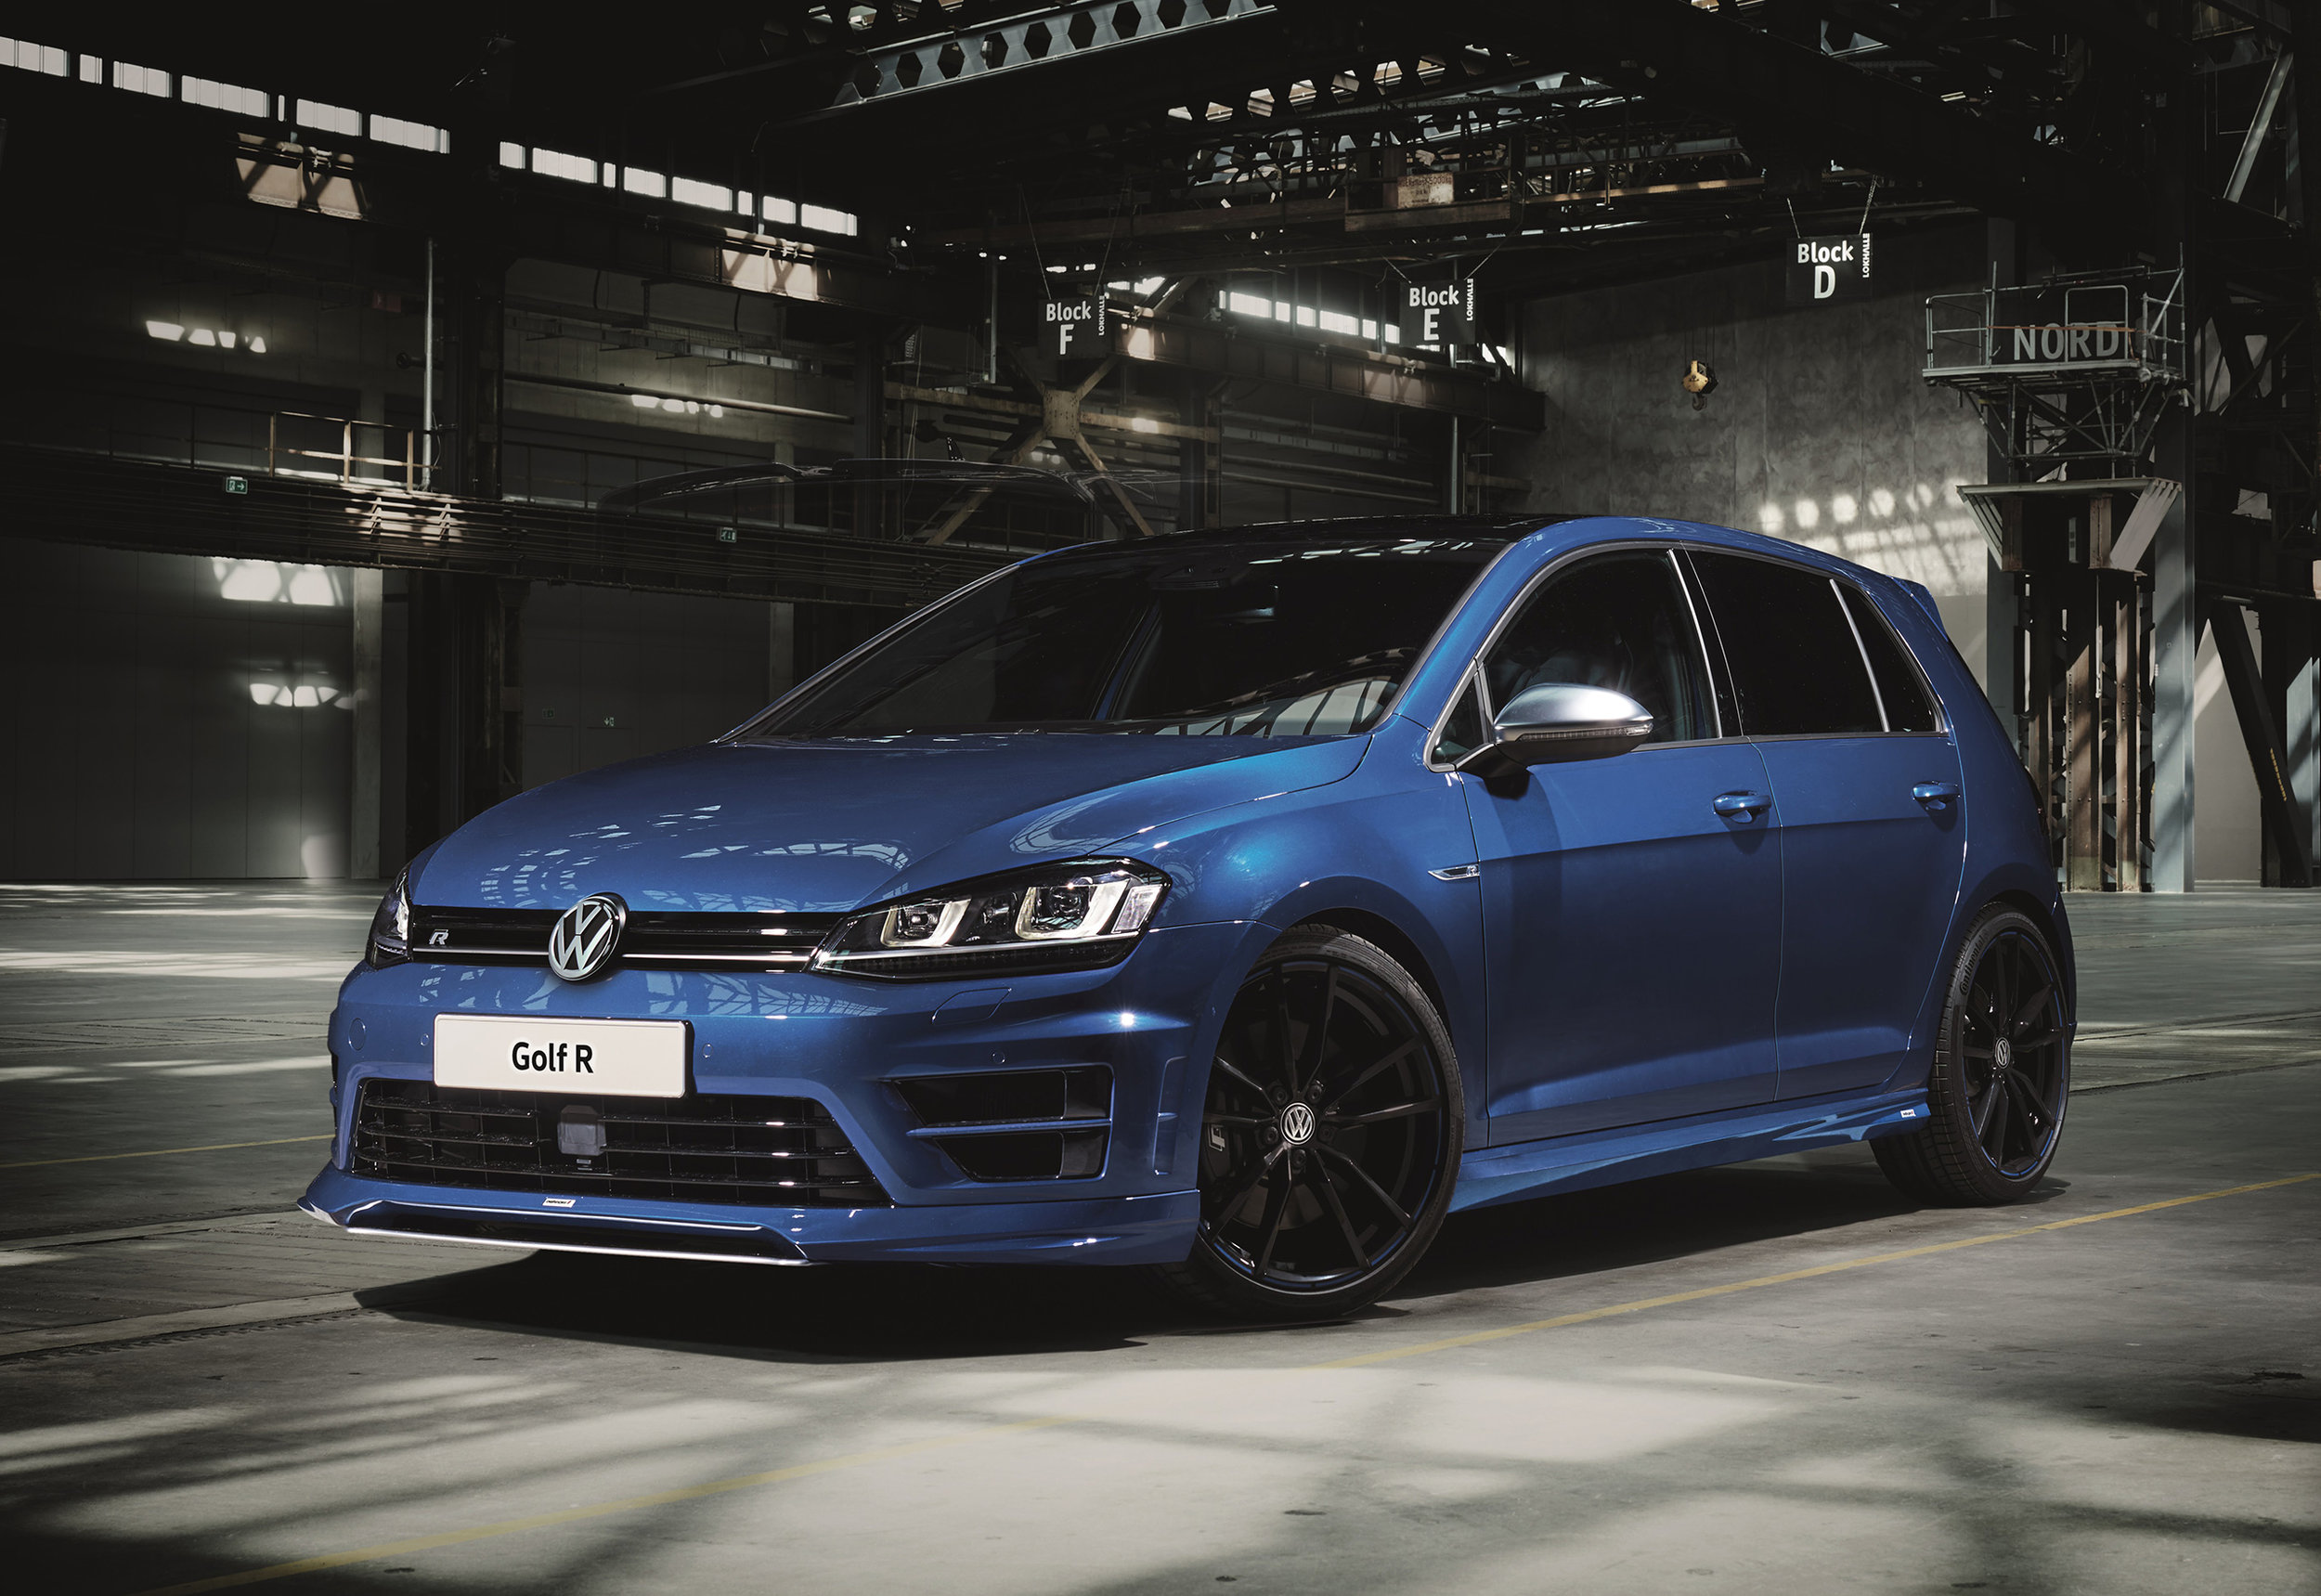 Volkswagen-Performance-Golfs-and-Oettinger-R-front.jpg